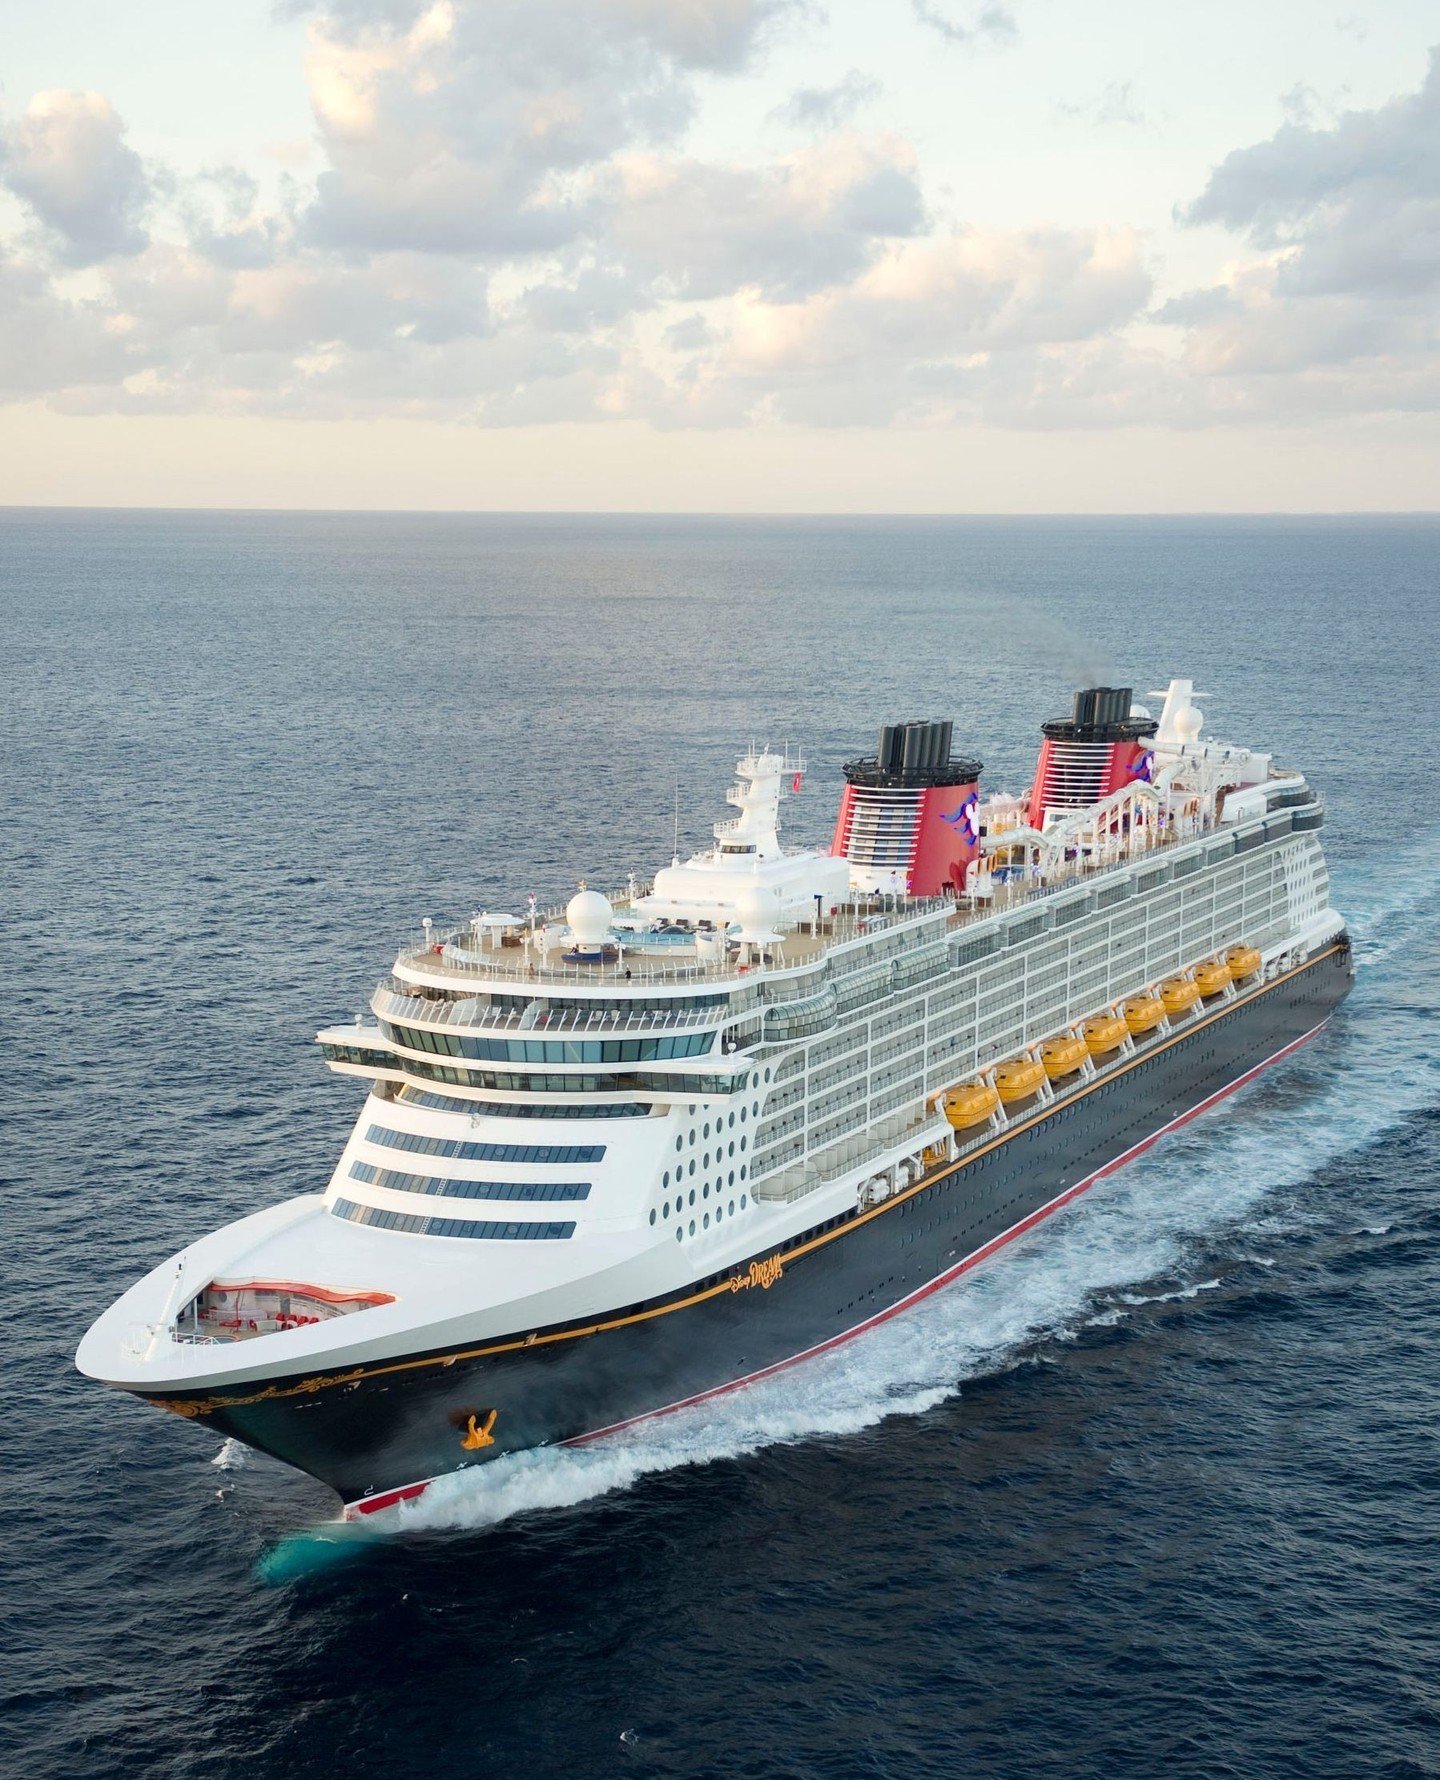 &quot;I know youuu, I sailed with you once upon The Disney Dream&quot; 🎵⁠
⁠
....wait that's not right...are those the lyrics? 🤔 Sorry, we're just so distracted by the amazing deals Disney Cruise Line is offering right now! ⁠
⁠
The Disney Dream is s